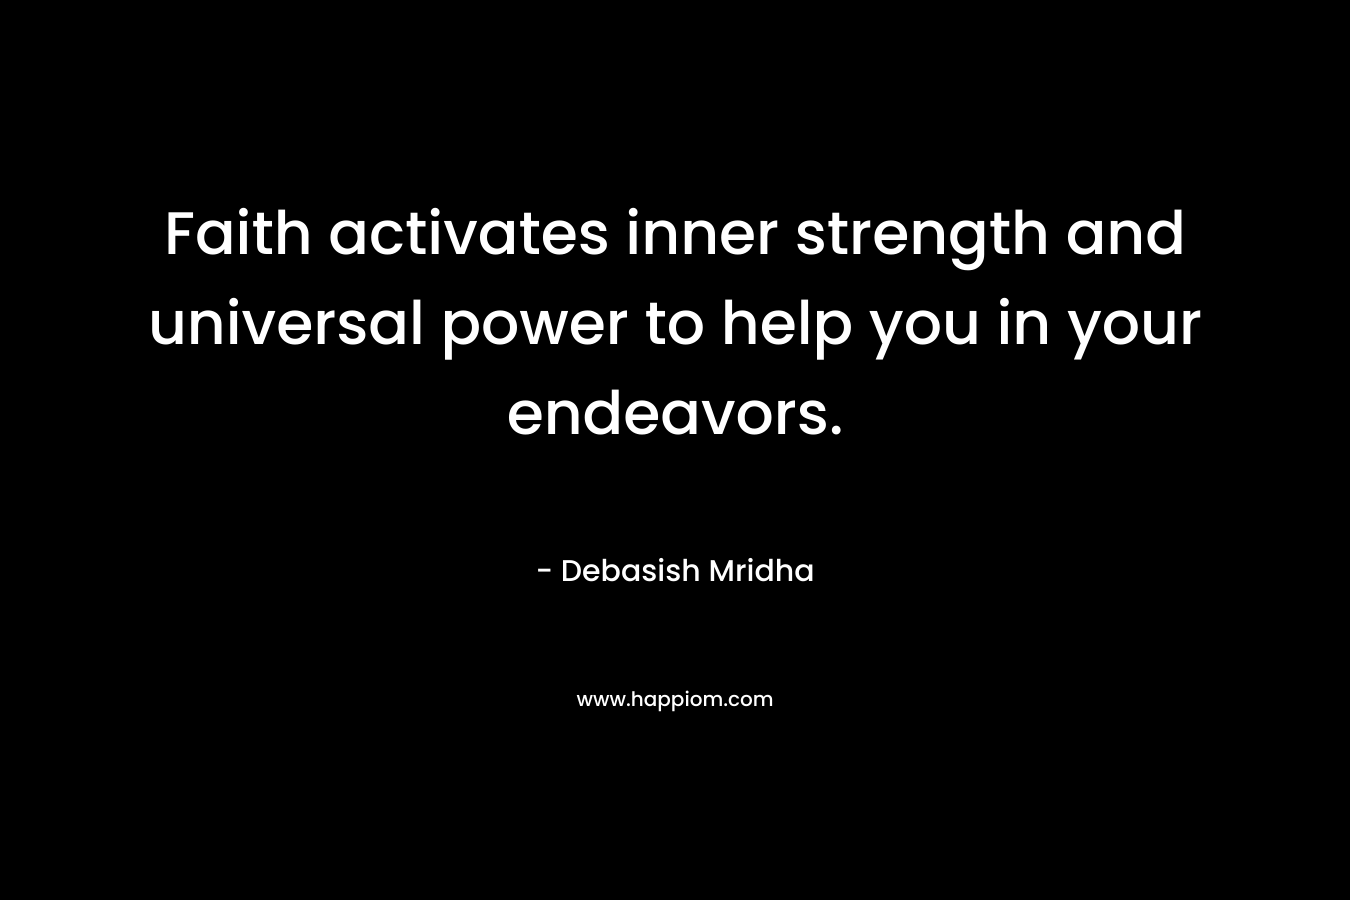 Faith activates inner strength and universal power to help you in your endeavors. – Debasish Mridha